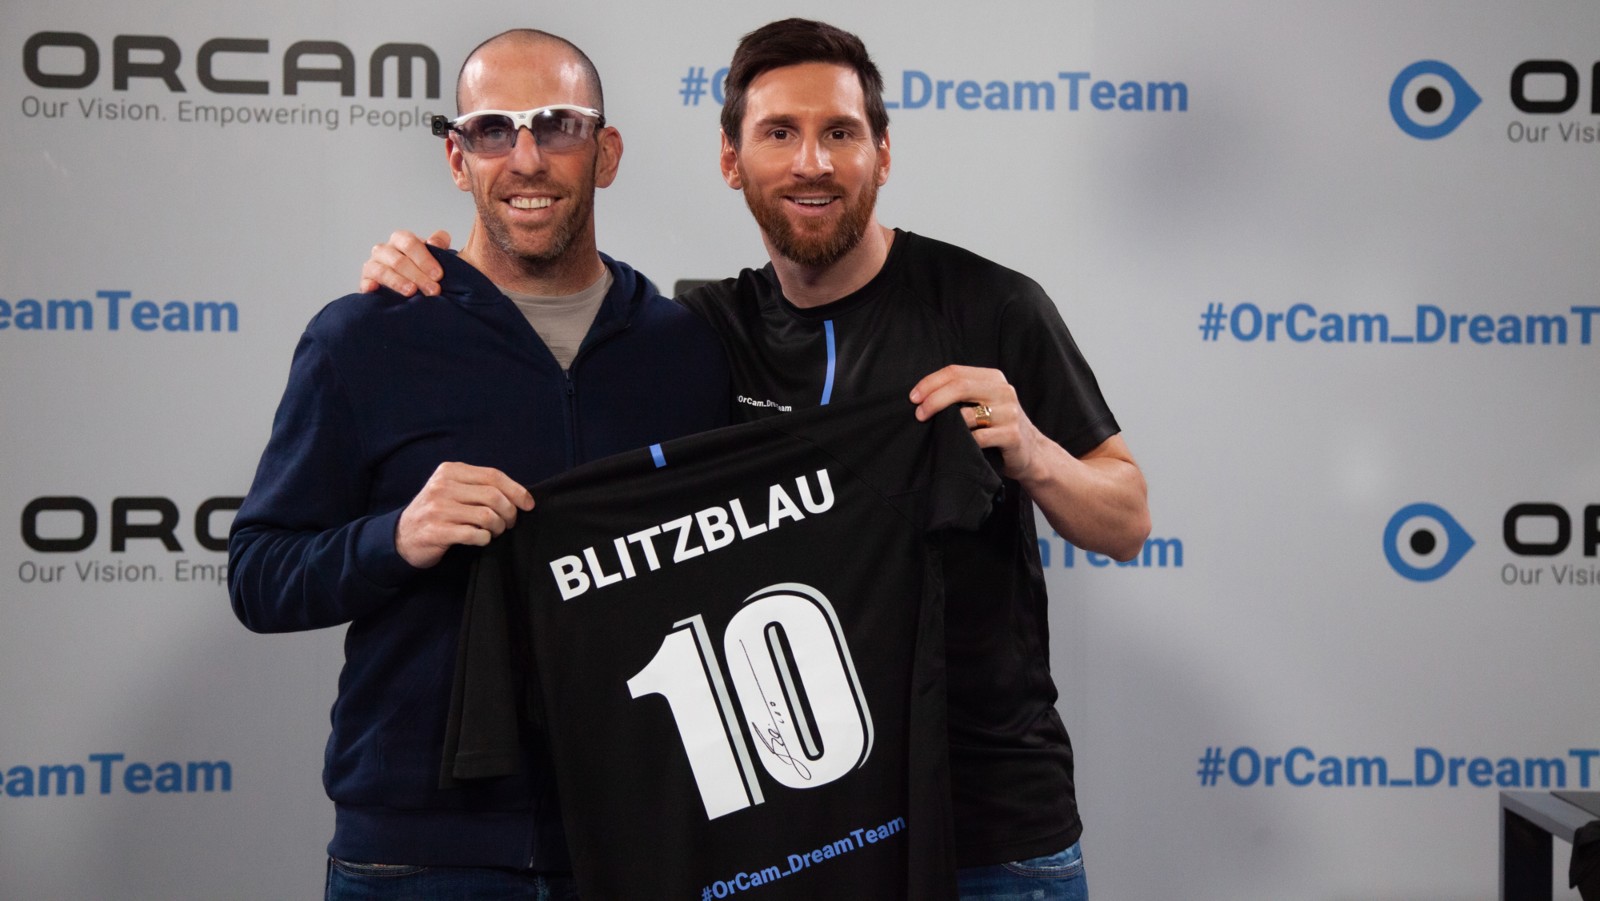 Triathlete, who lost vision in terror attack, wears OrCam while posing with Messi